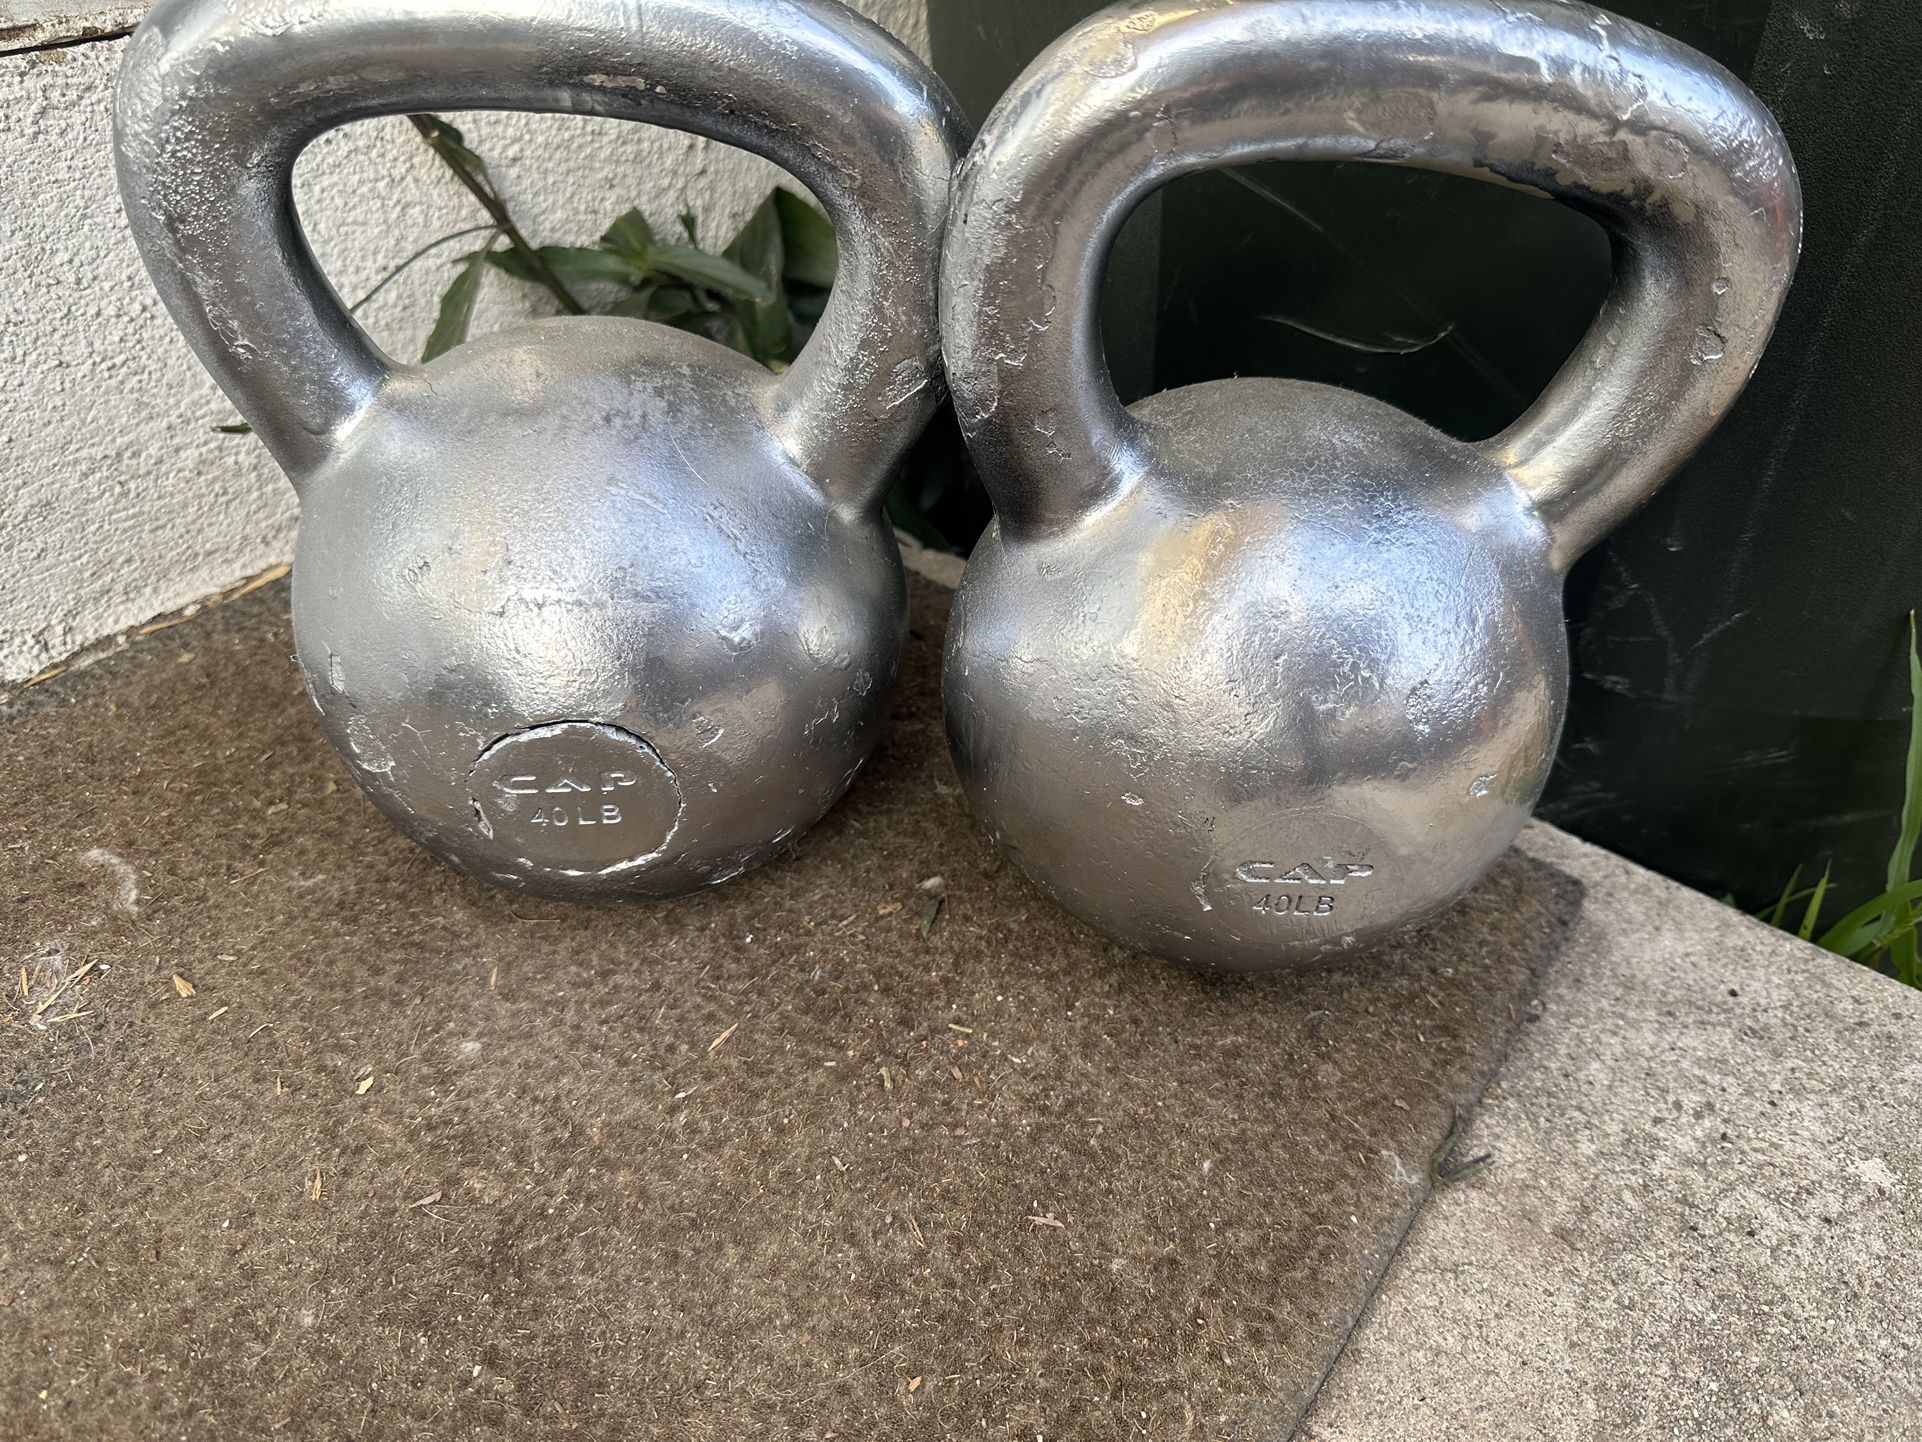 Pair Of 40 Lbs Kettle Bells Firm Price 